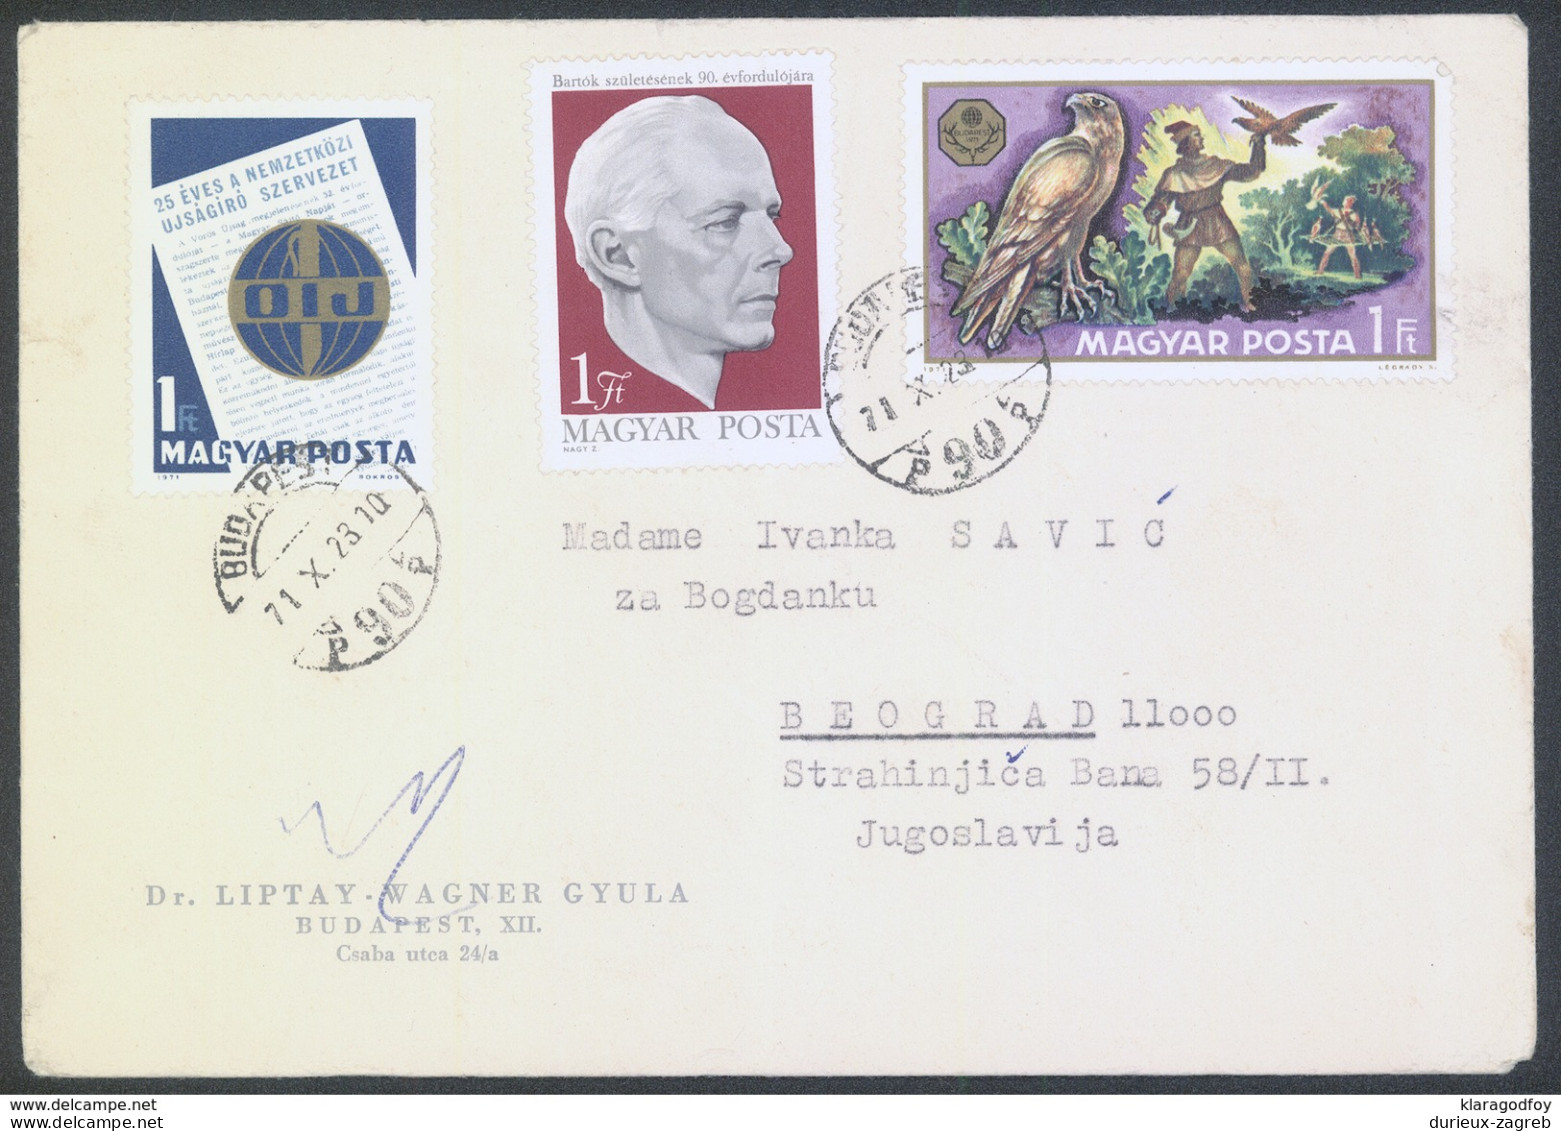 Hungary, Dr. Liptay Wagner Gyula Company Letter Cover Travelled 1971 Budapest Pmk B170410 - Storia Postale